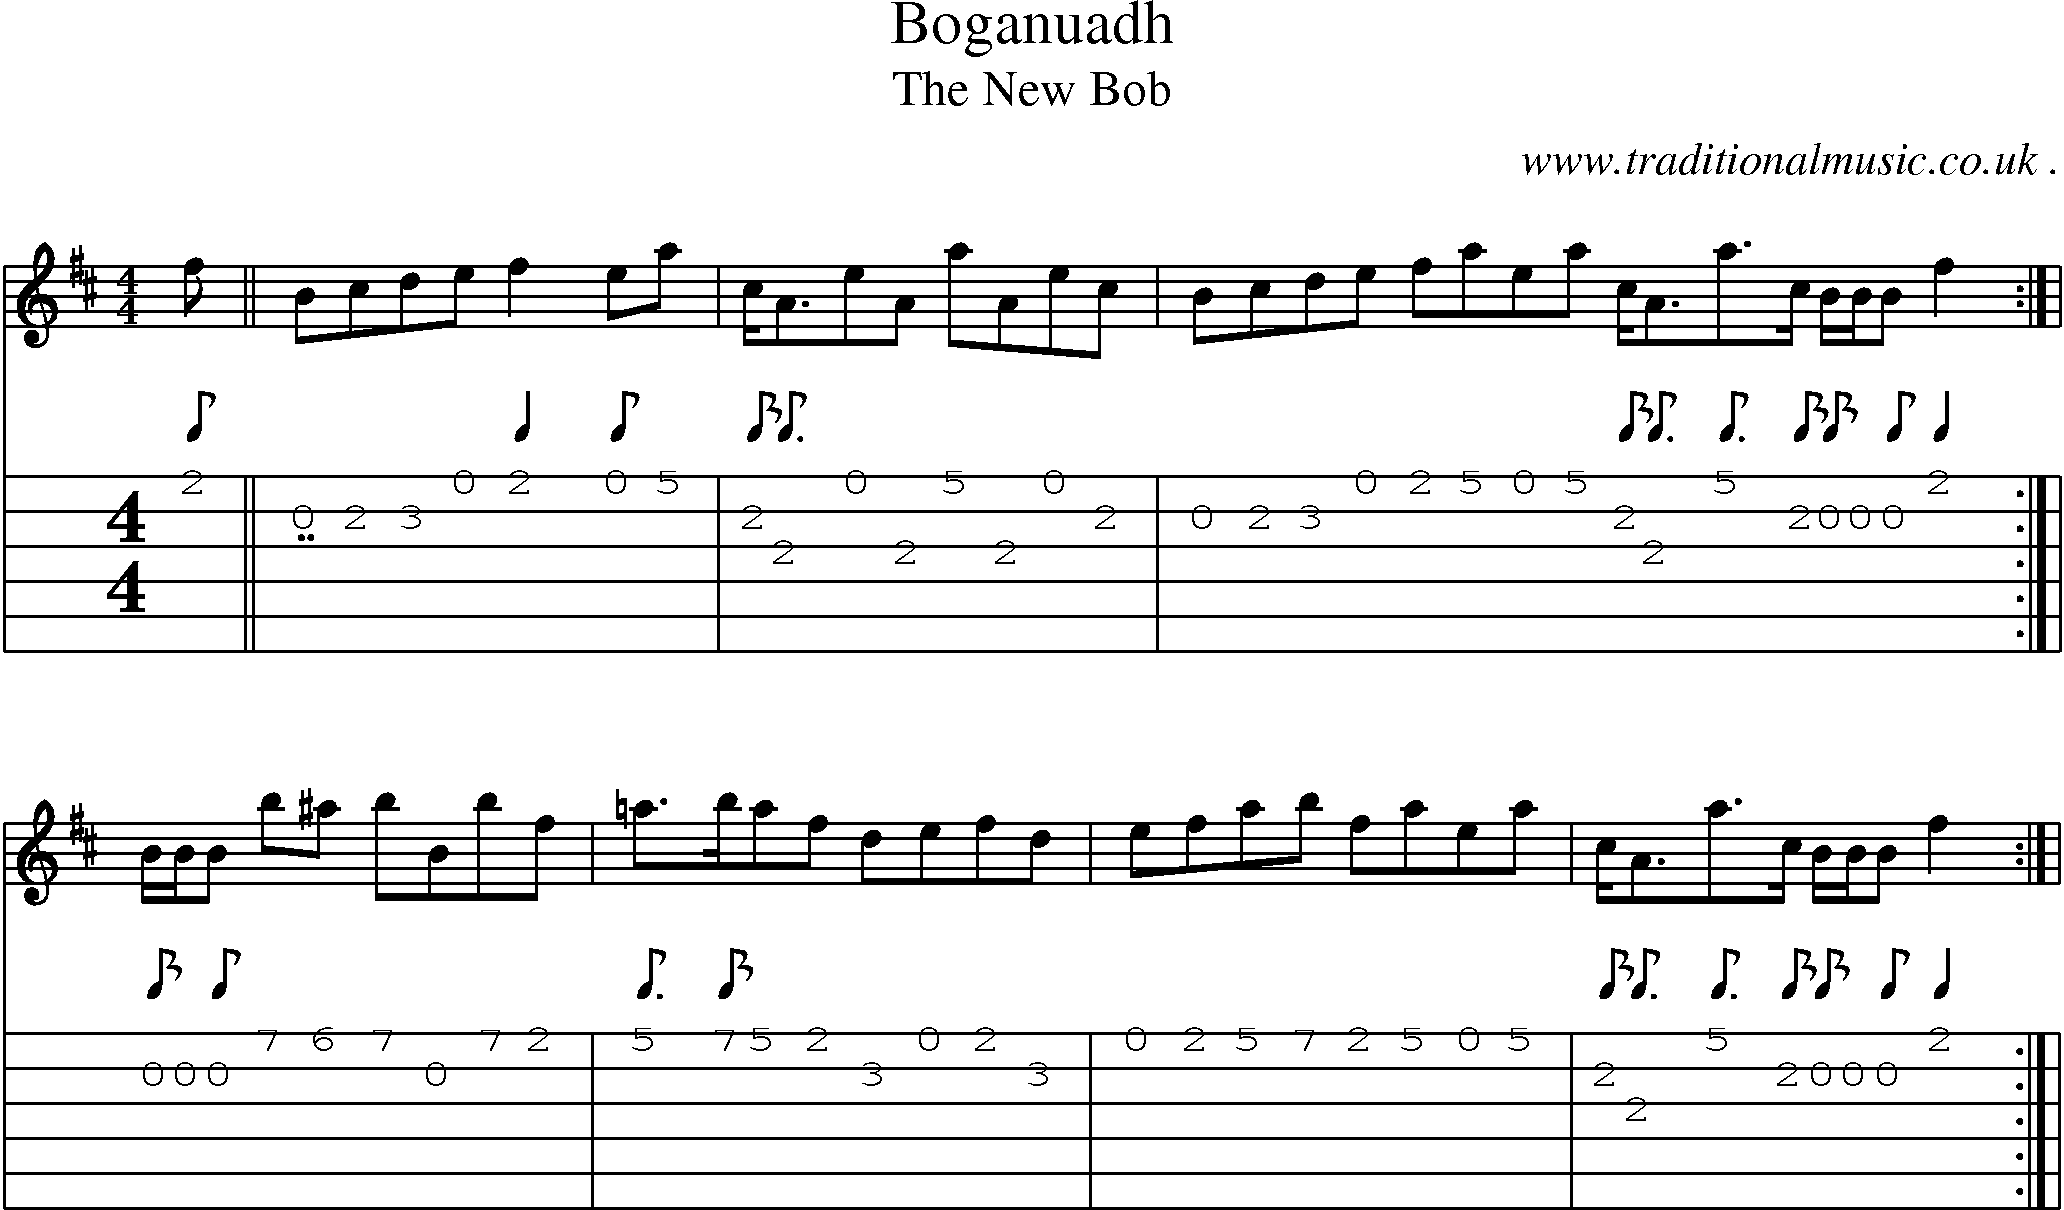 Sheet-Music and Guitar Tabs for Boganuadh